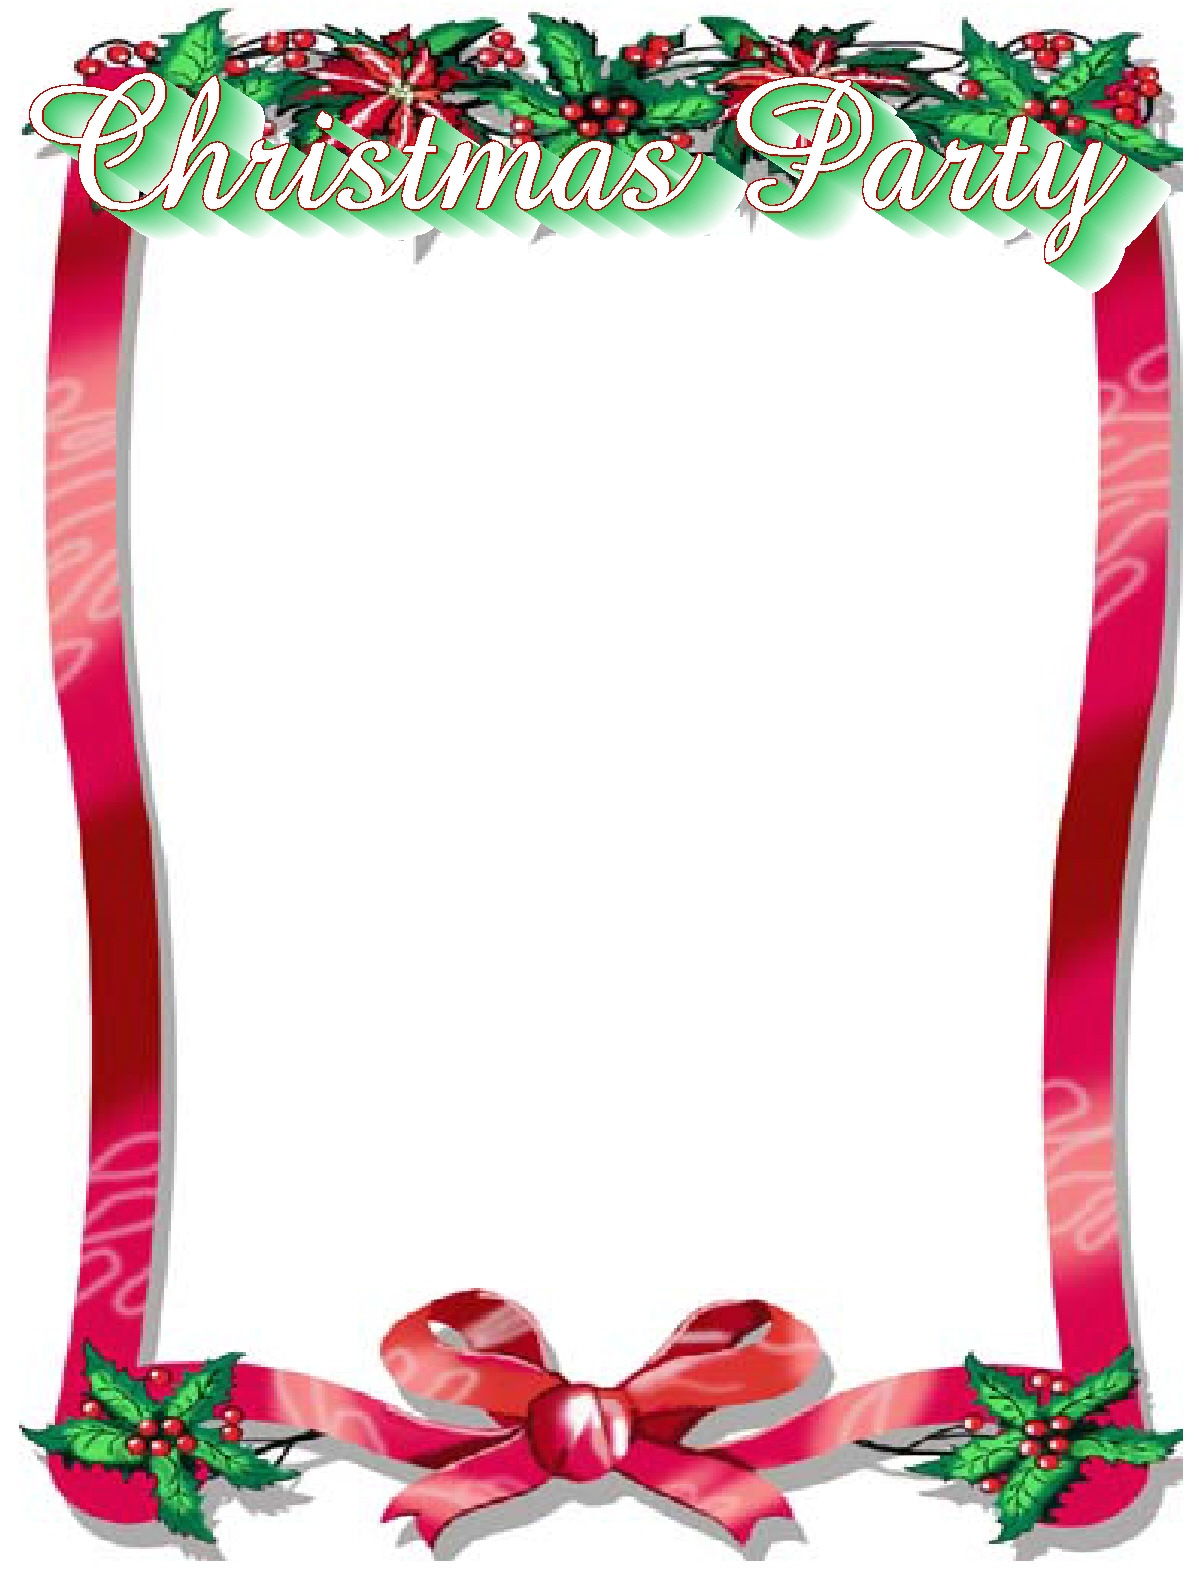 Free Christmas Templates For Word. christmas stationery templates